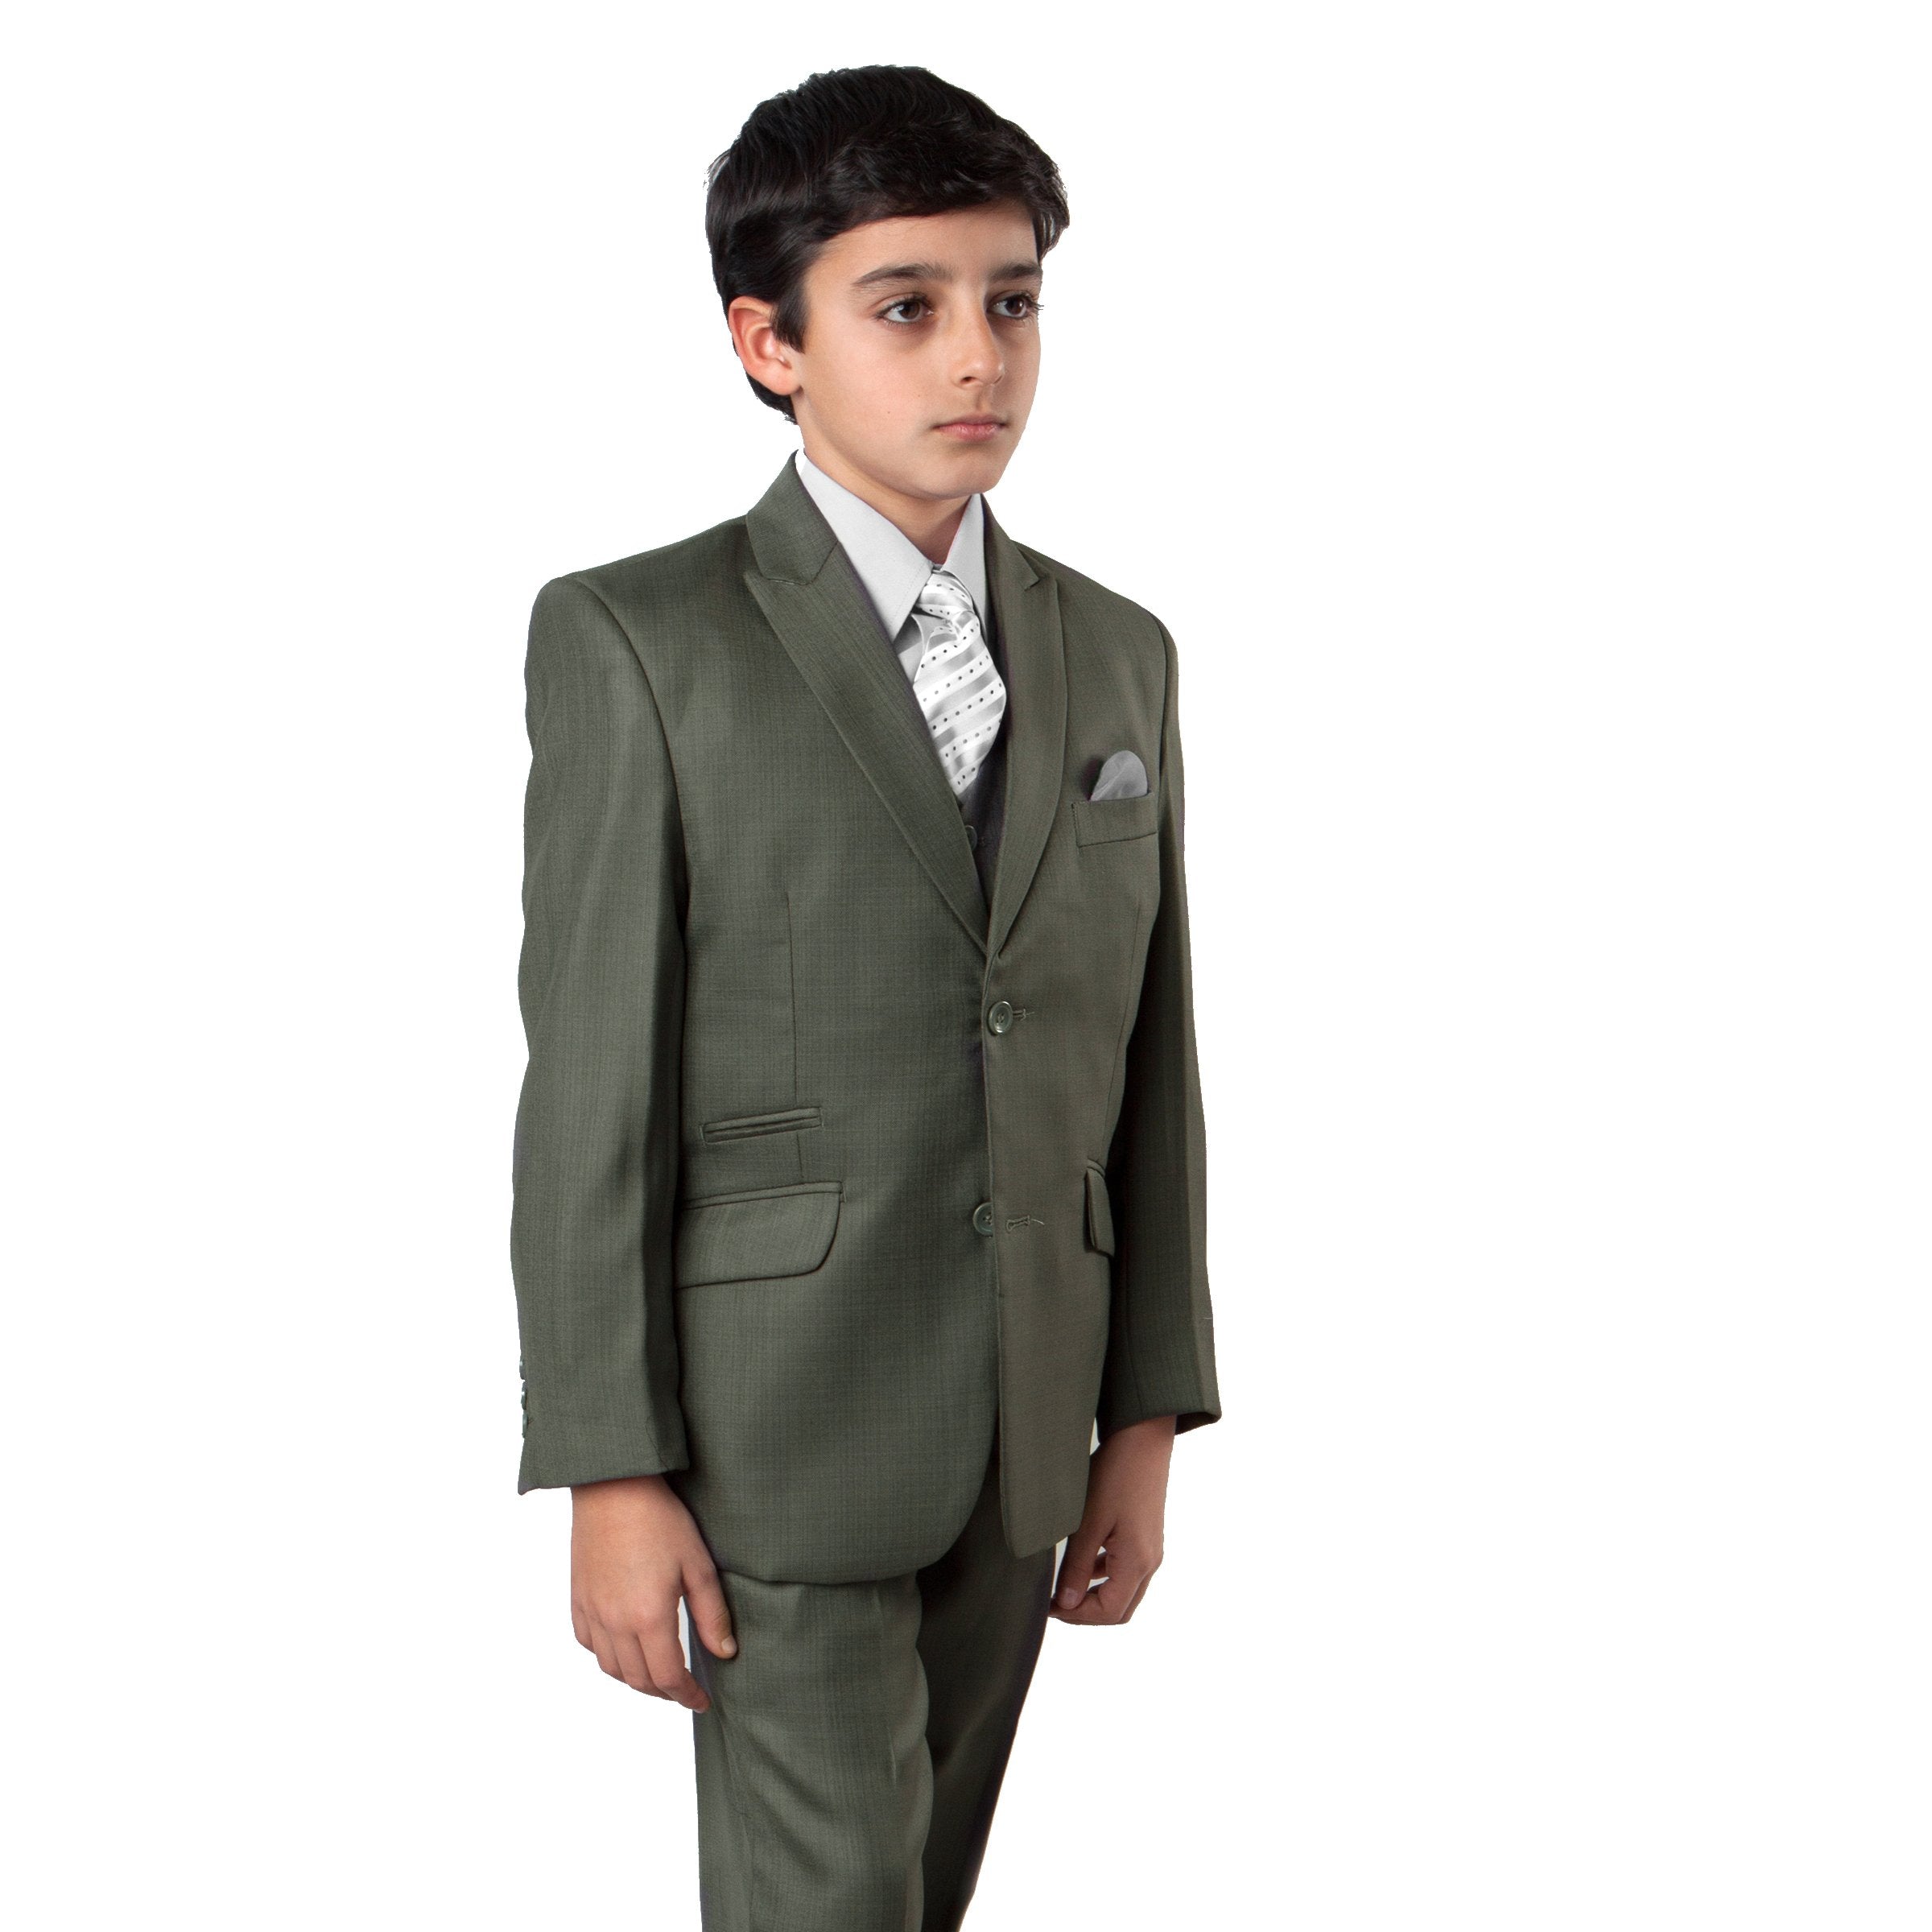 5-PC Boy's Solid Suit with Matching Shirt & Tie Suits For Boy's